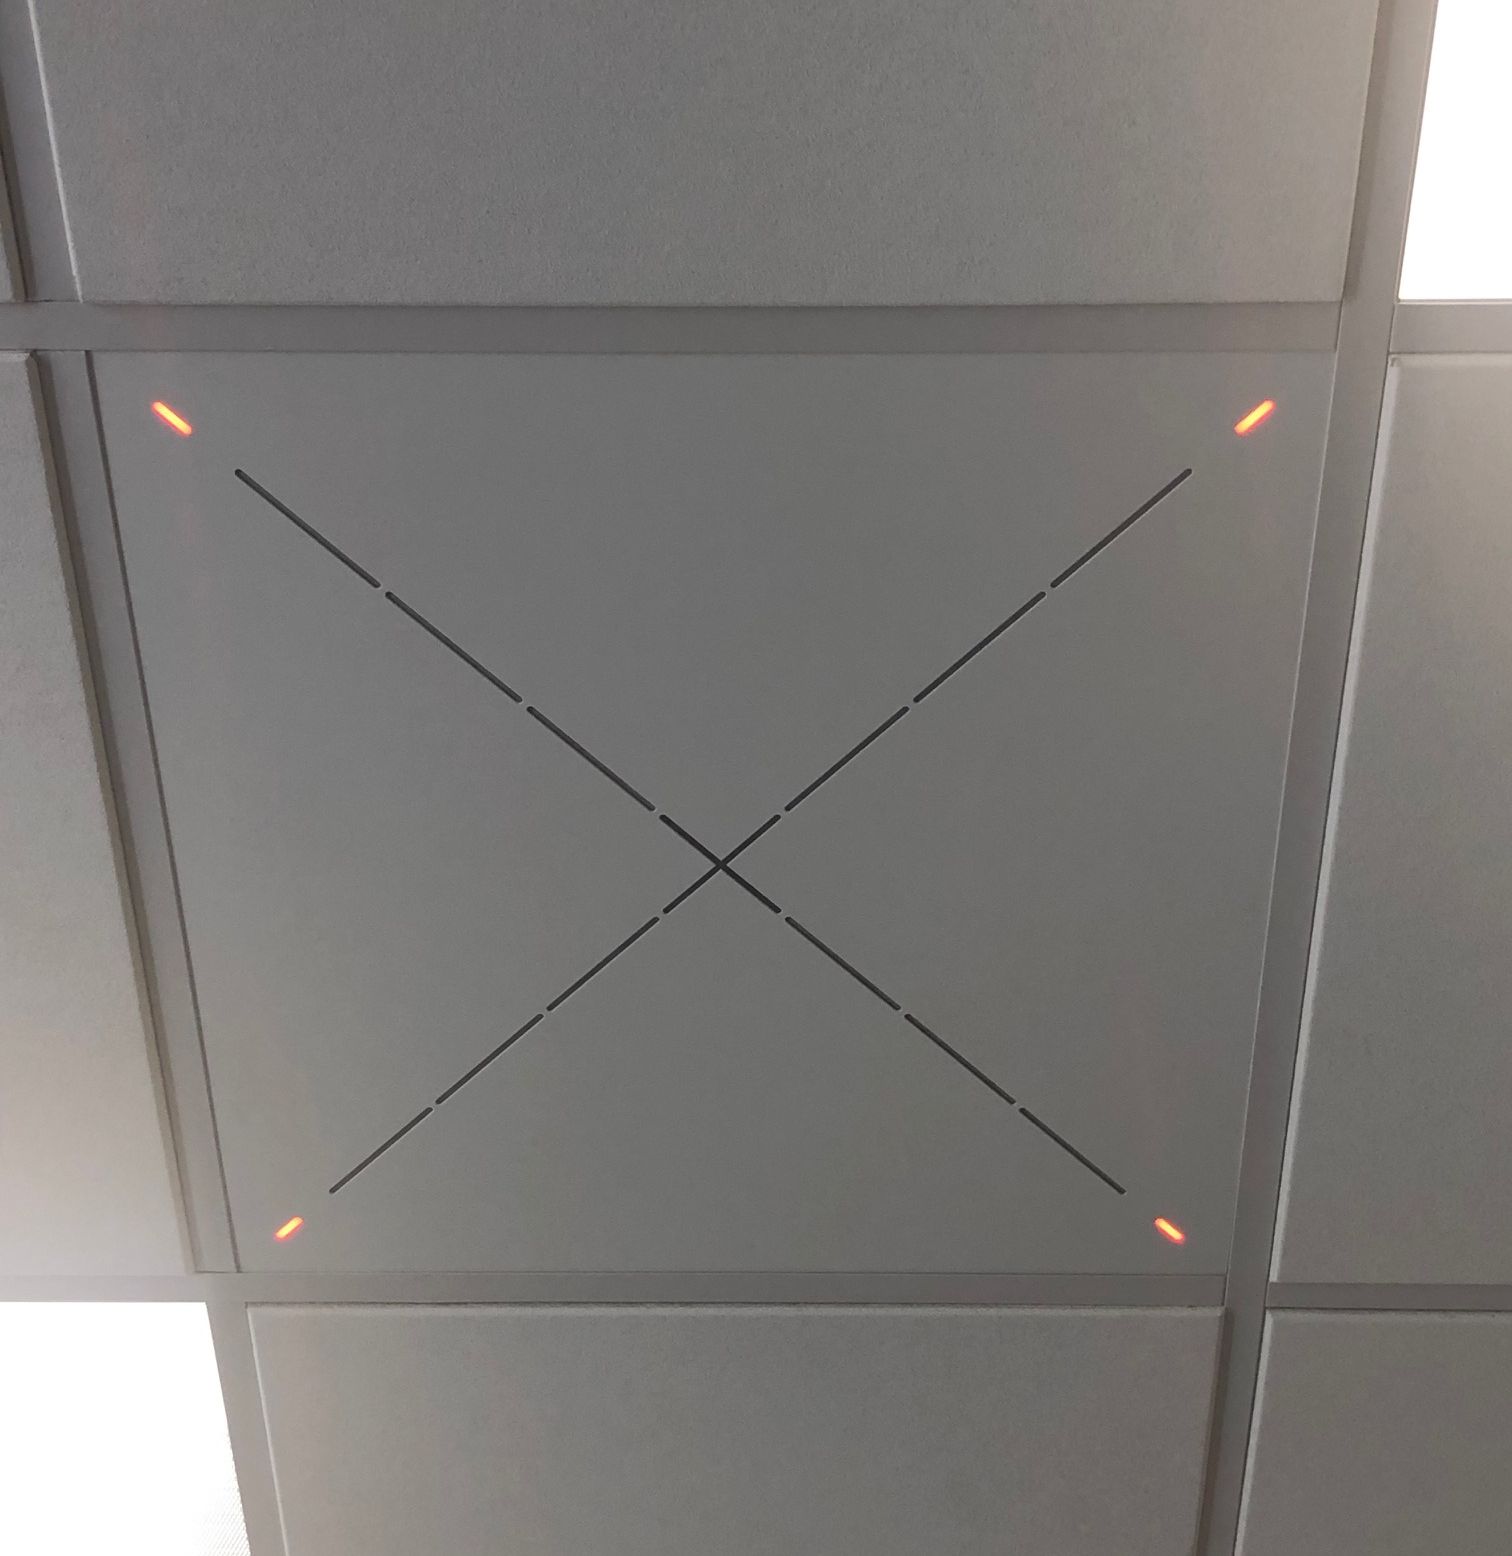 A close up of Sennheiser’s Team Connect Ceiling at St. John’s University. The 2’ x 2’ tile is aesthetically seamless and easy to install.
(Image courtesy of St. John’s University)